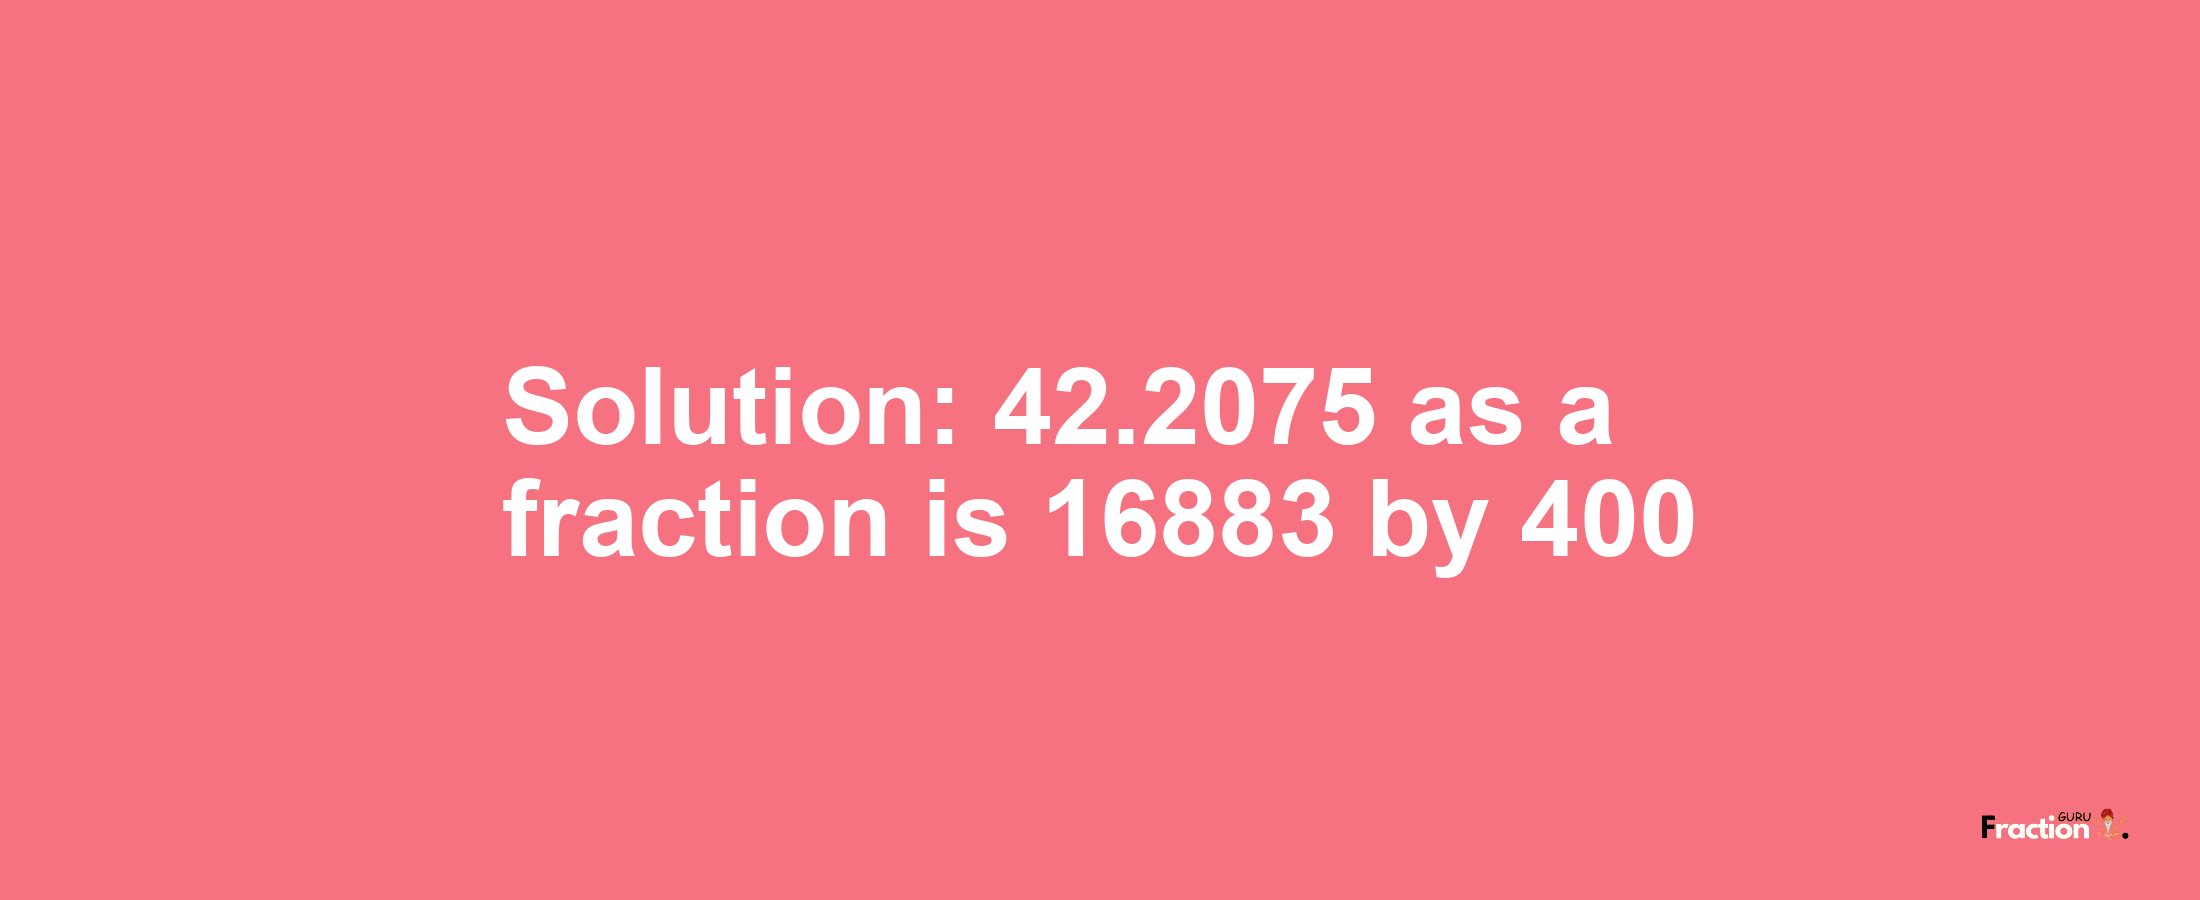 Solution:42.2075 as a fraction is 16883/400